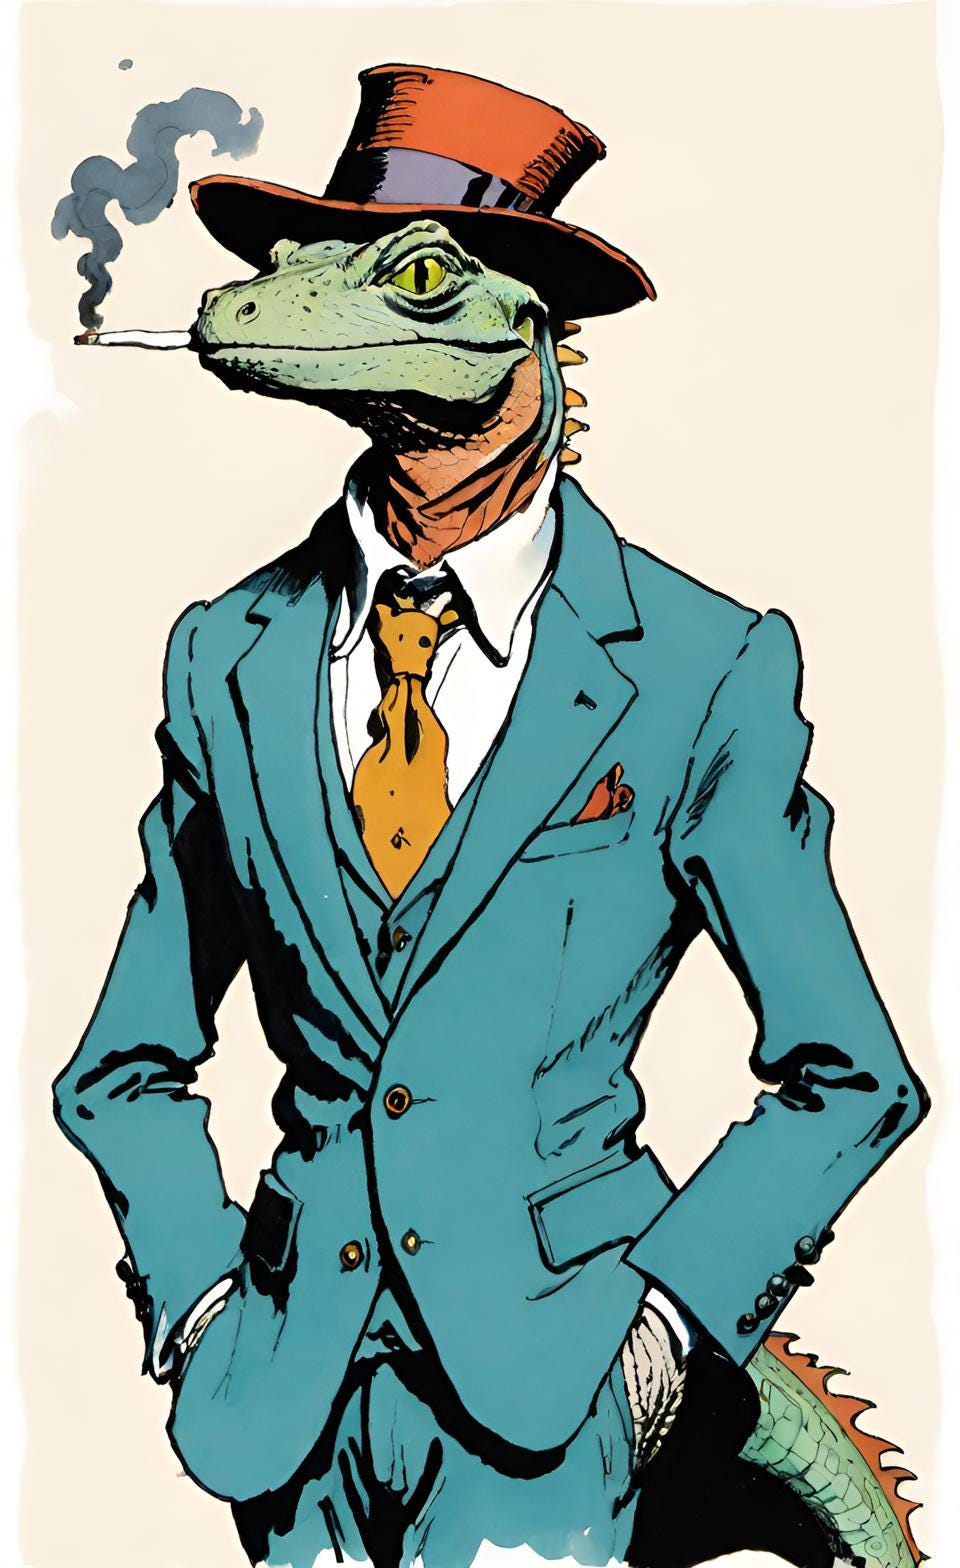 A lizard wearing a fine suit, a hat, and smoking.